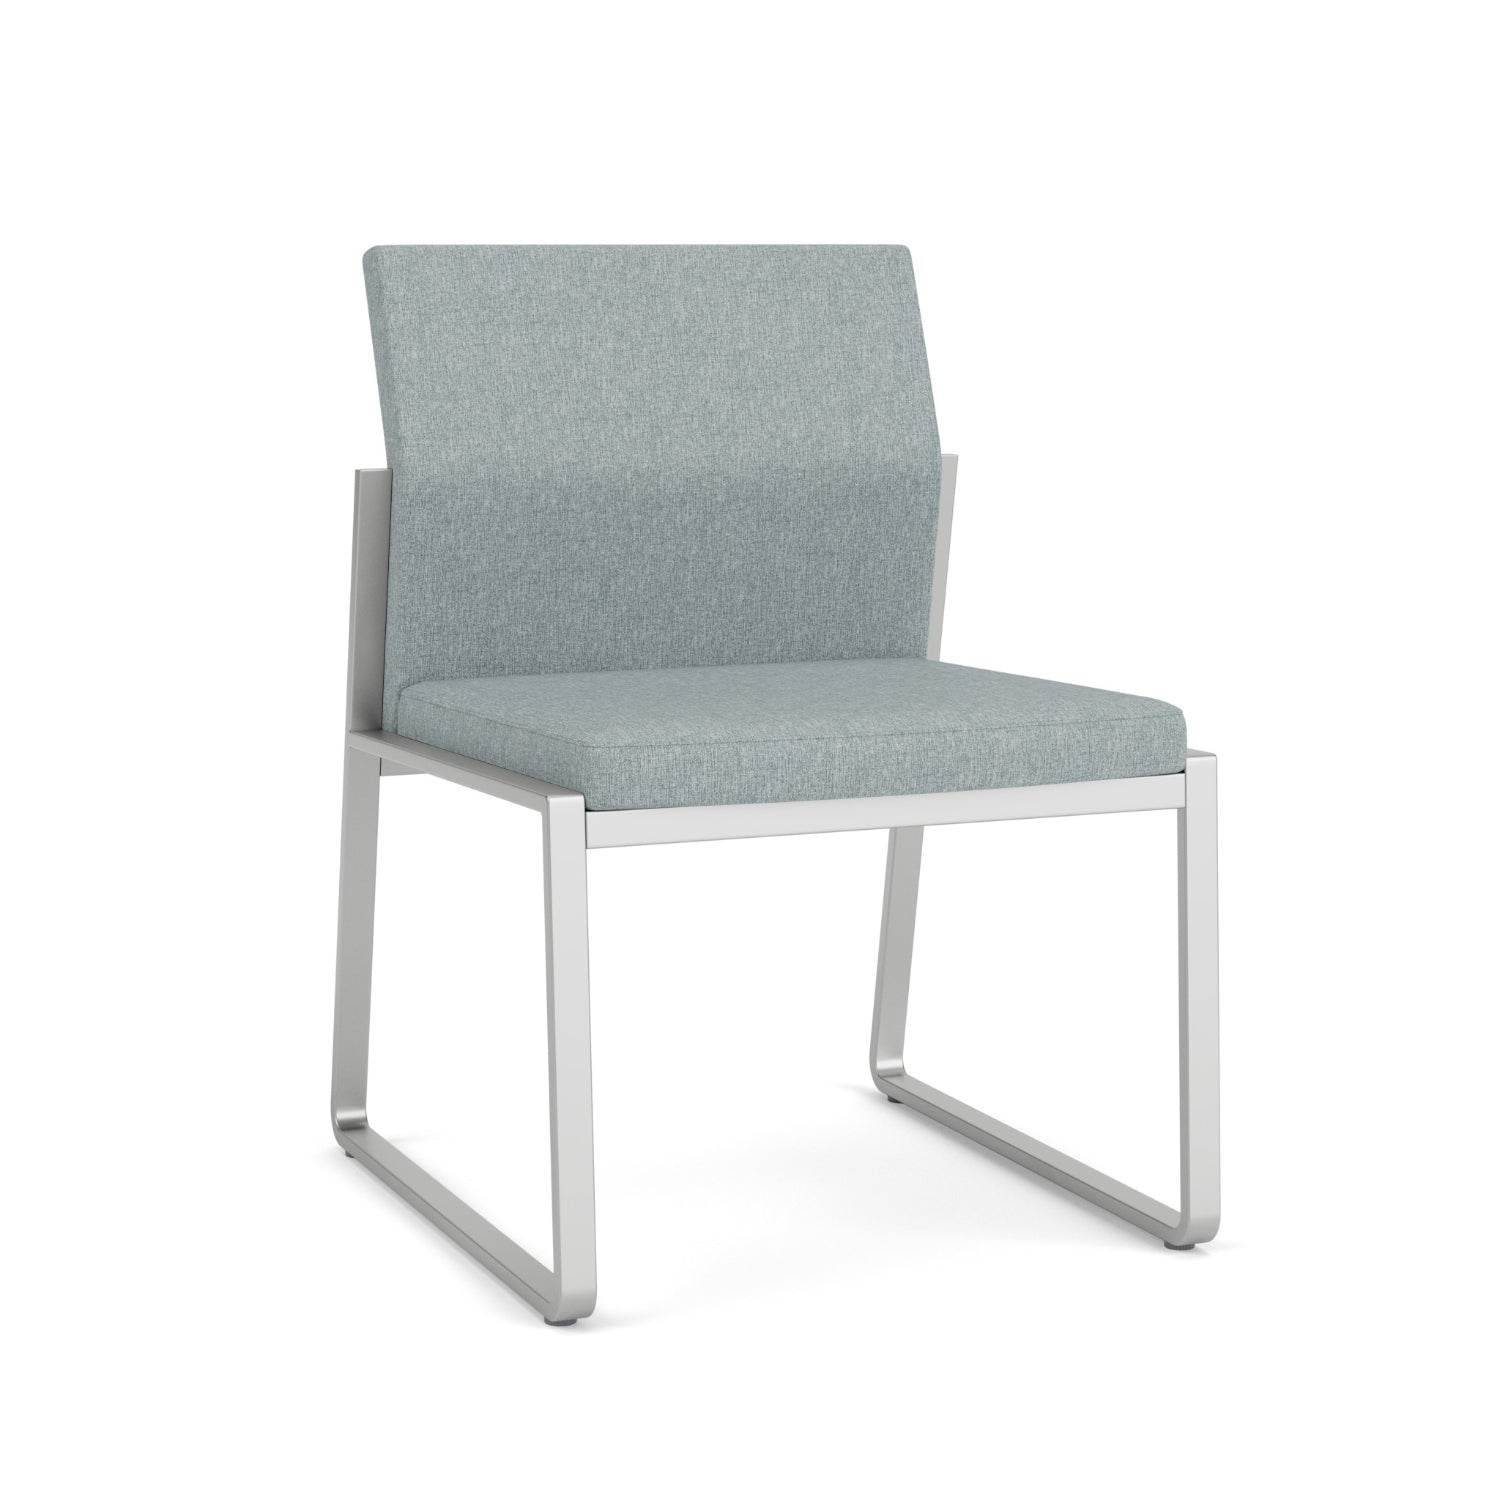 Gansett Collection Reception Seating, Armless Guest Chair, Healthcare Vinyl Upholstery, FREE SHIPPING